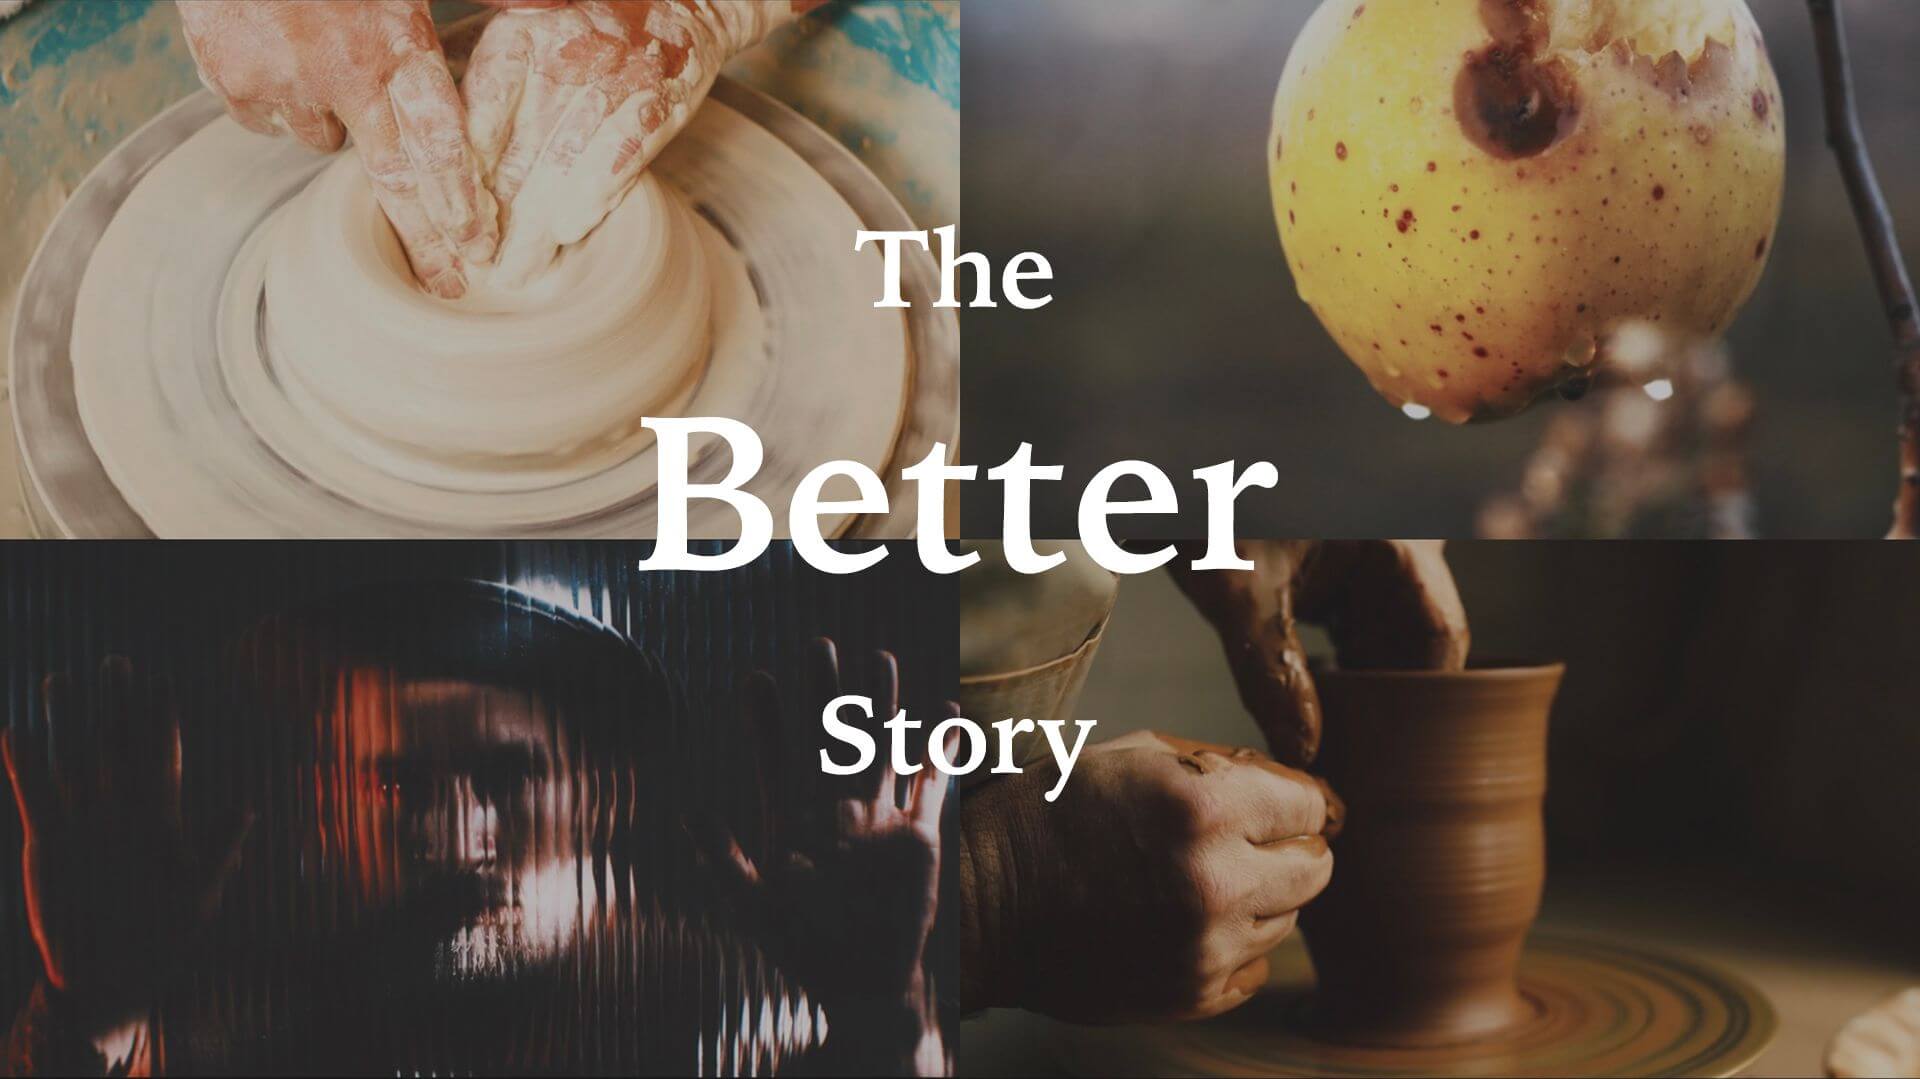 Discover The Better Story